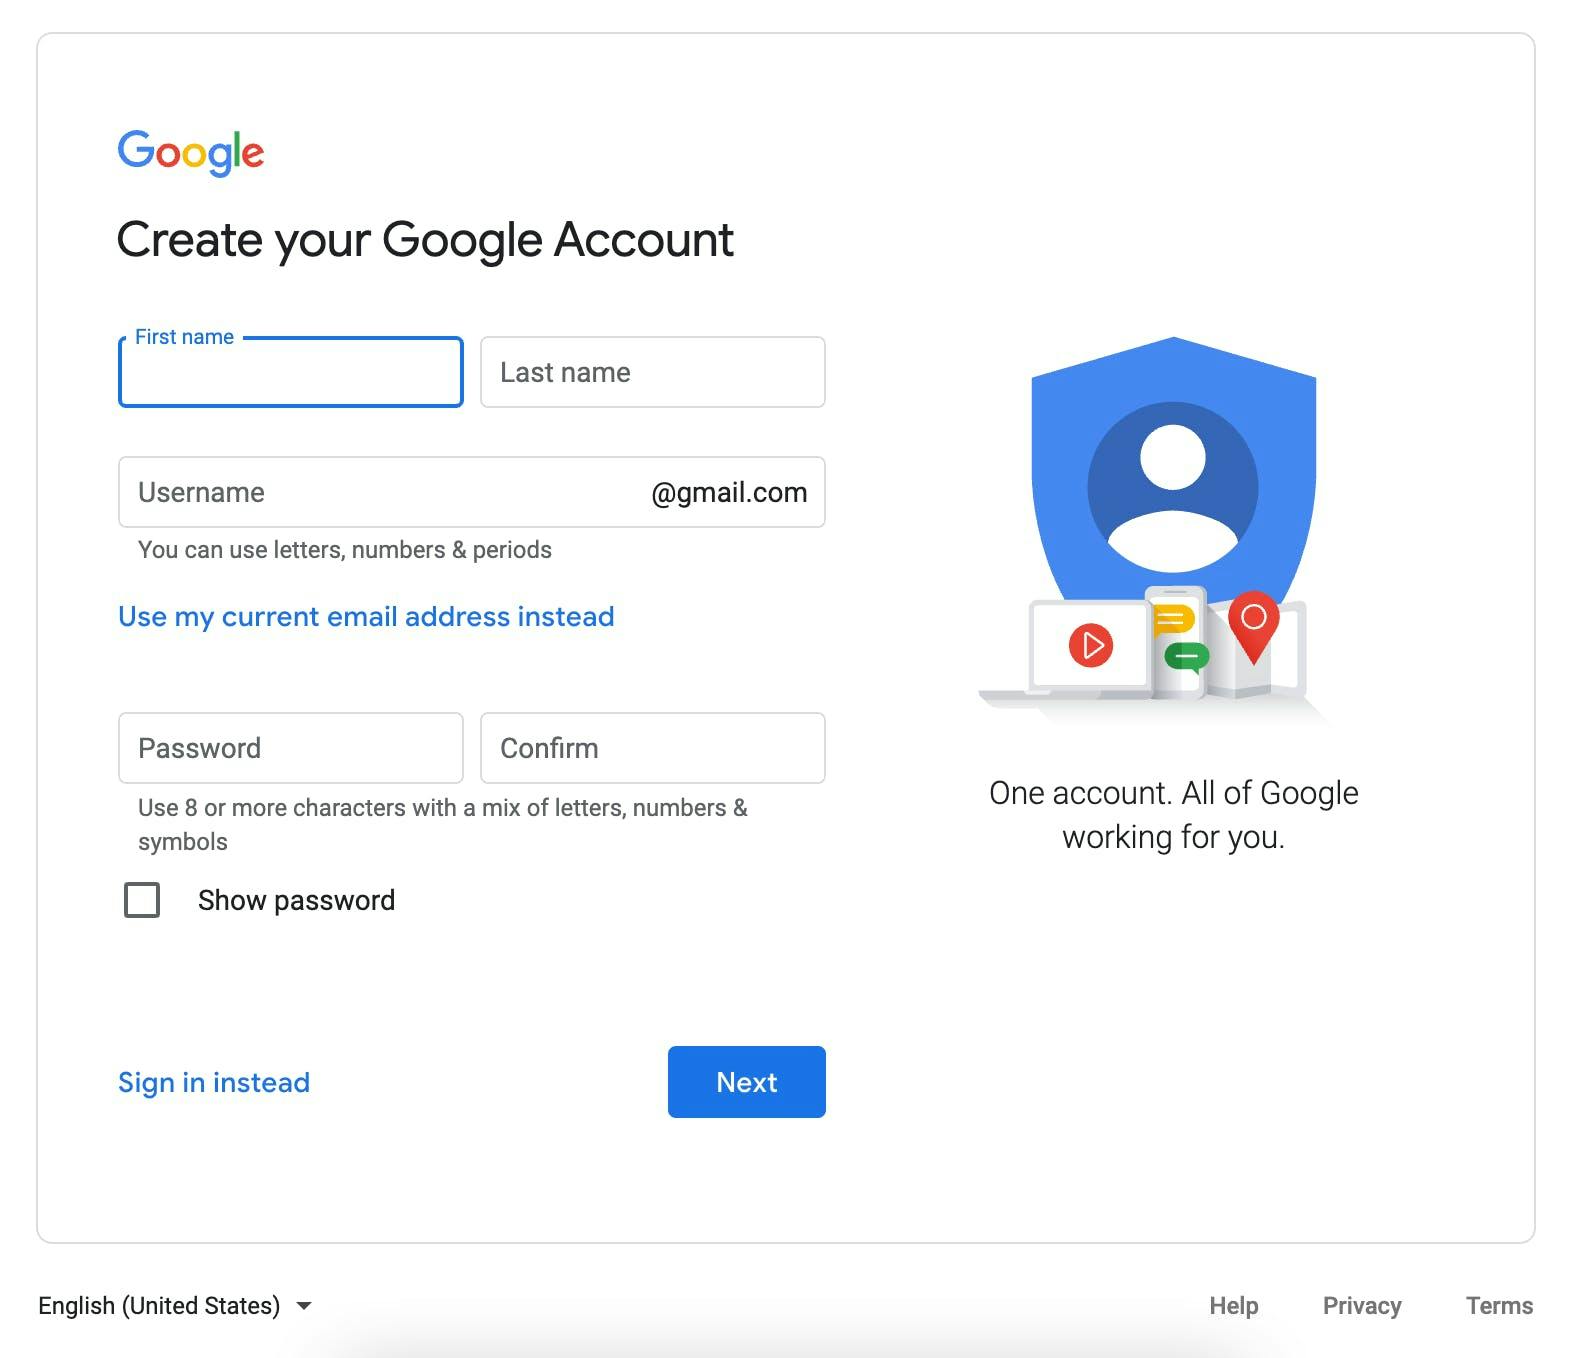 Last step to creating a Google account showing fields for name, email, and password